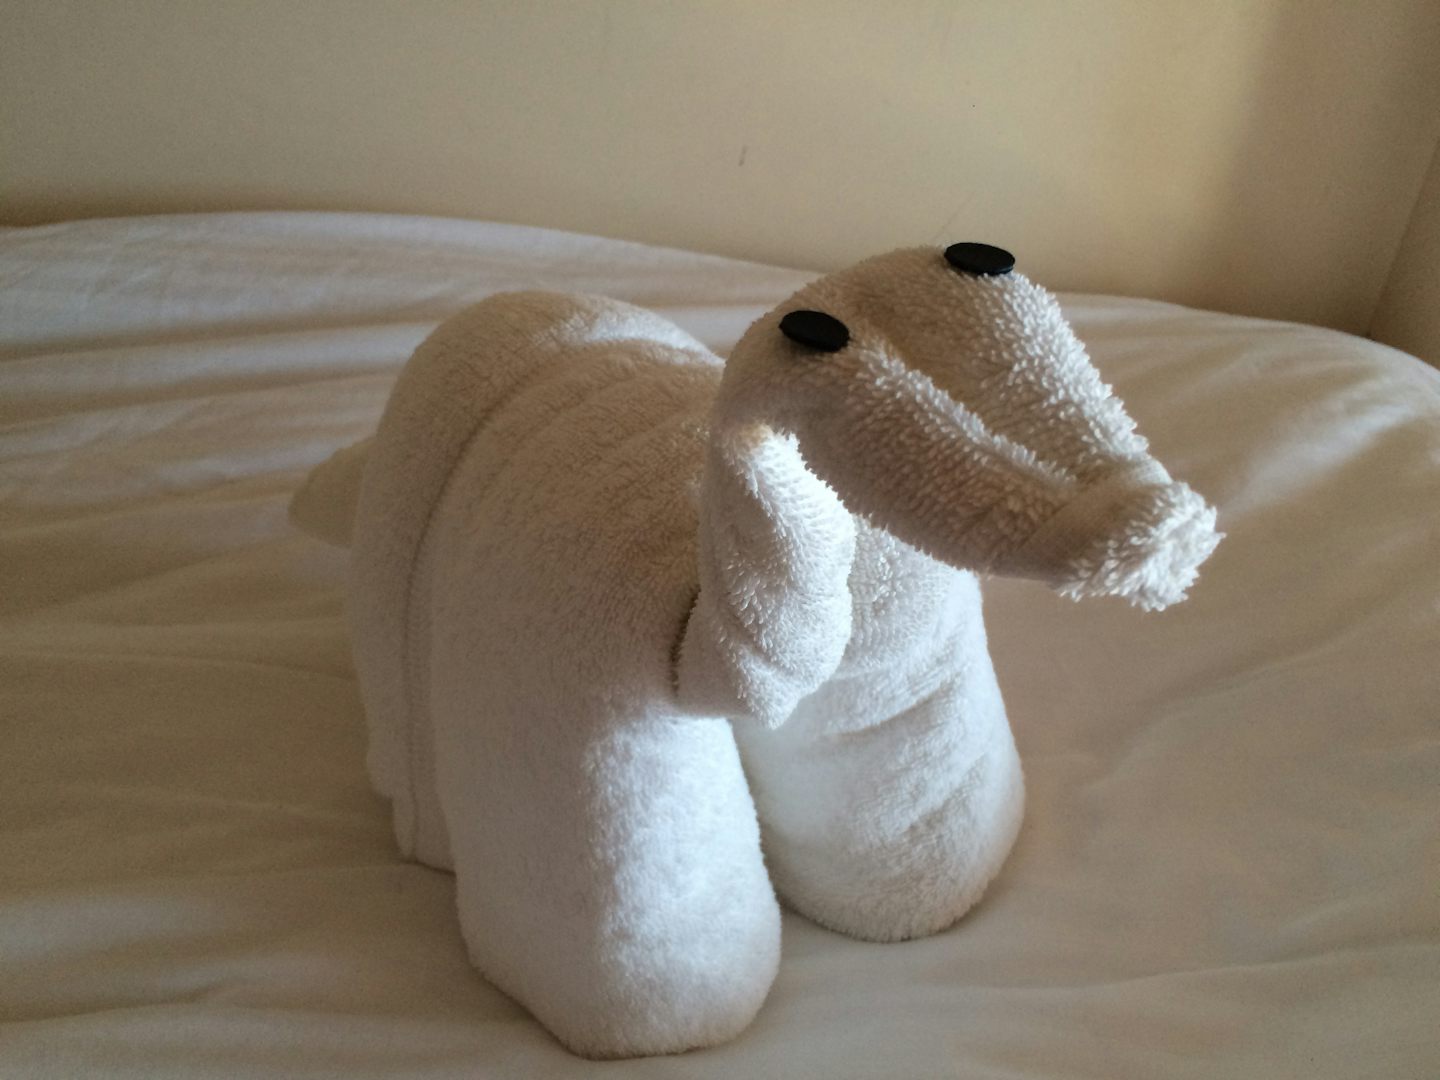 New towel animals appeared daily.